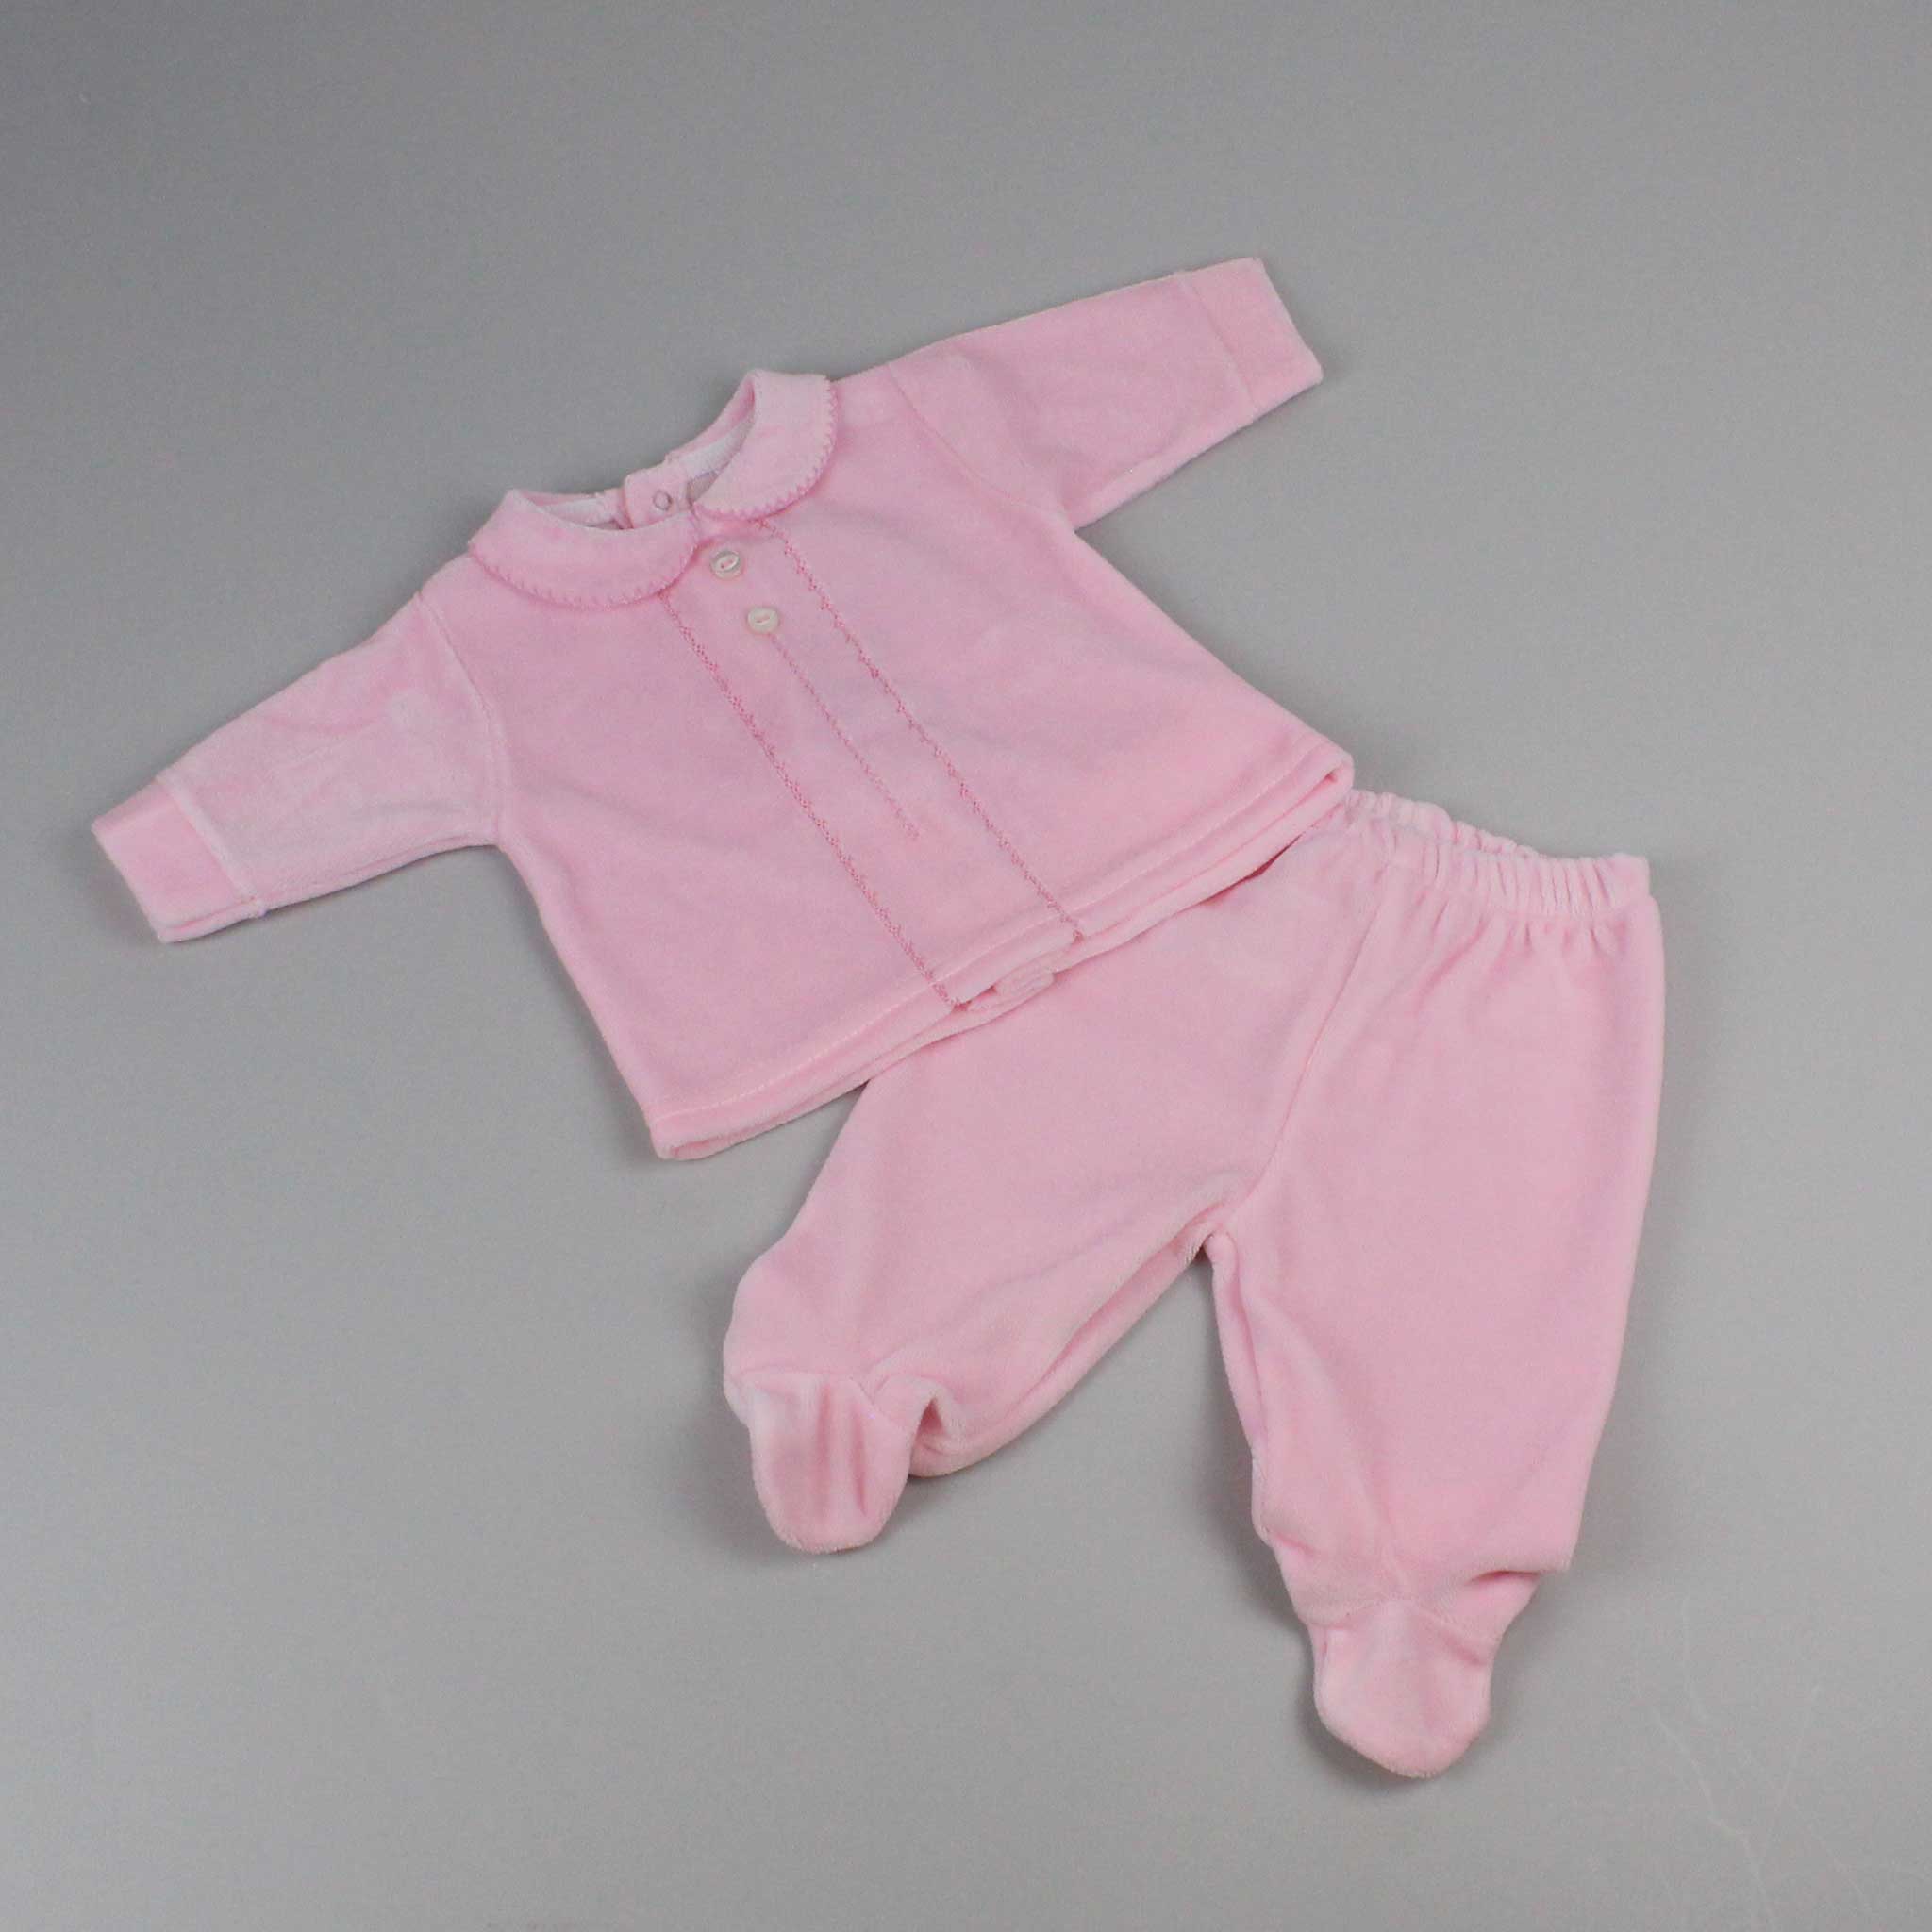 Baby Girls Velour Pink Two Piece Outfit pex